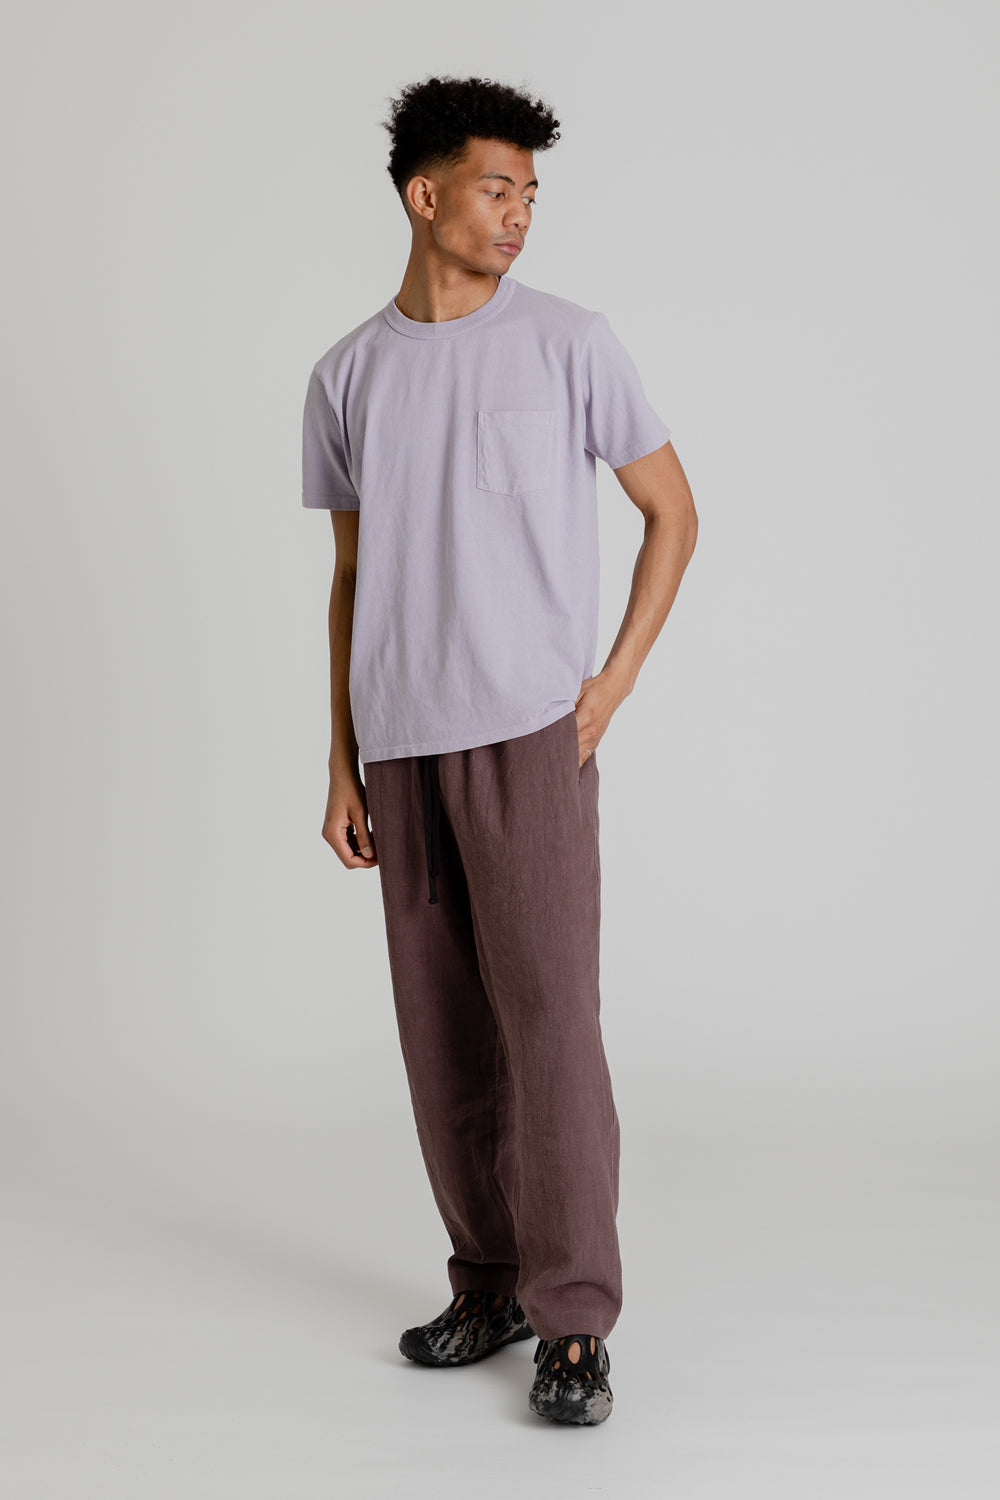 Velva Sheen Pigment Dyed Pocket Tee in Orchid